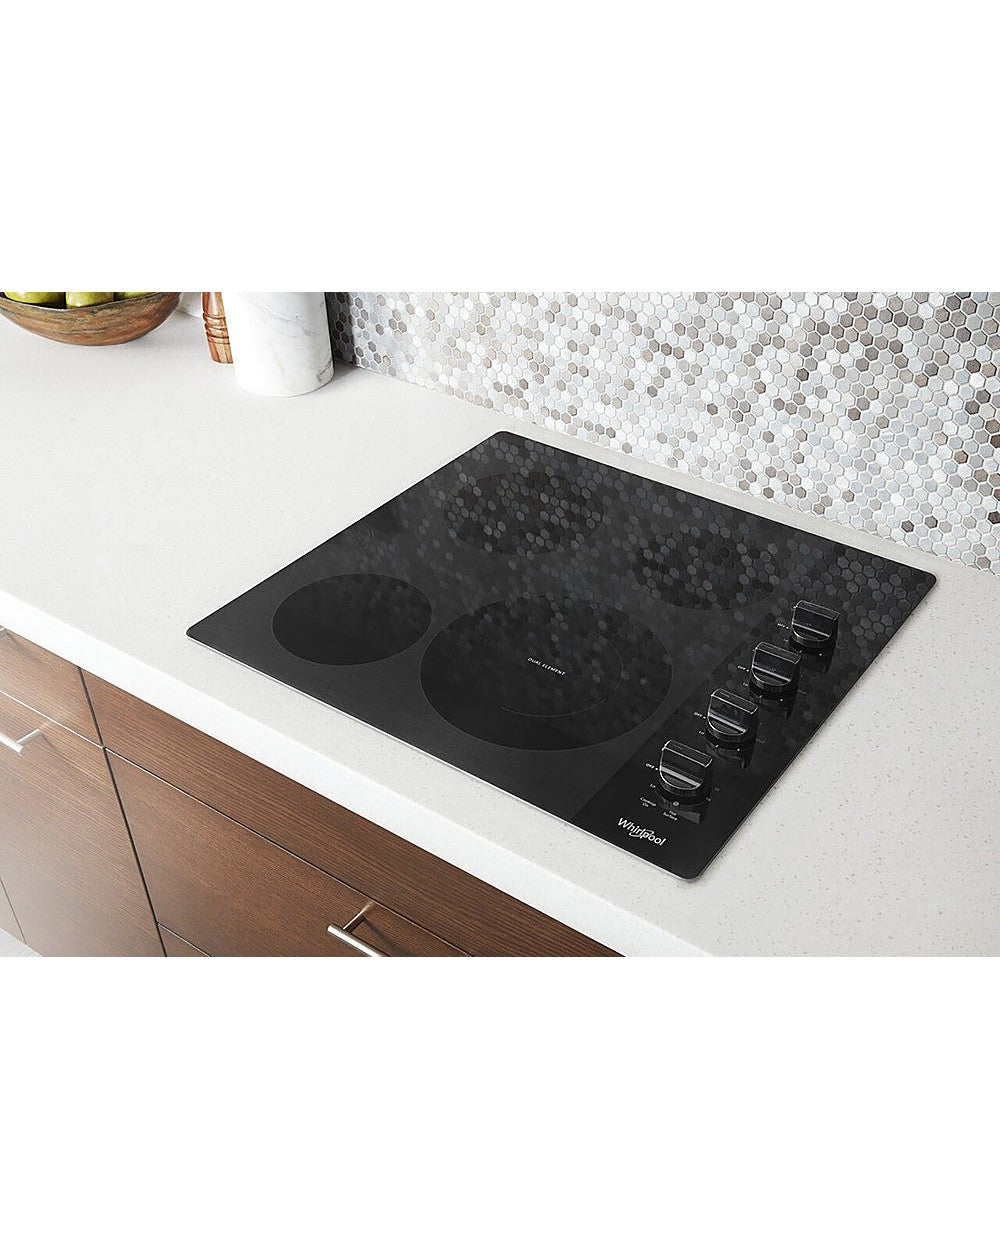 WHIRLPOOL WCE55US4HB 24-inch Compact Electric Ceramic Glass Cooktop